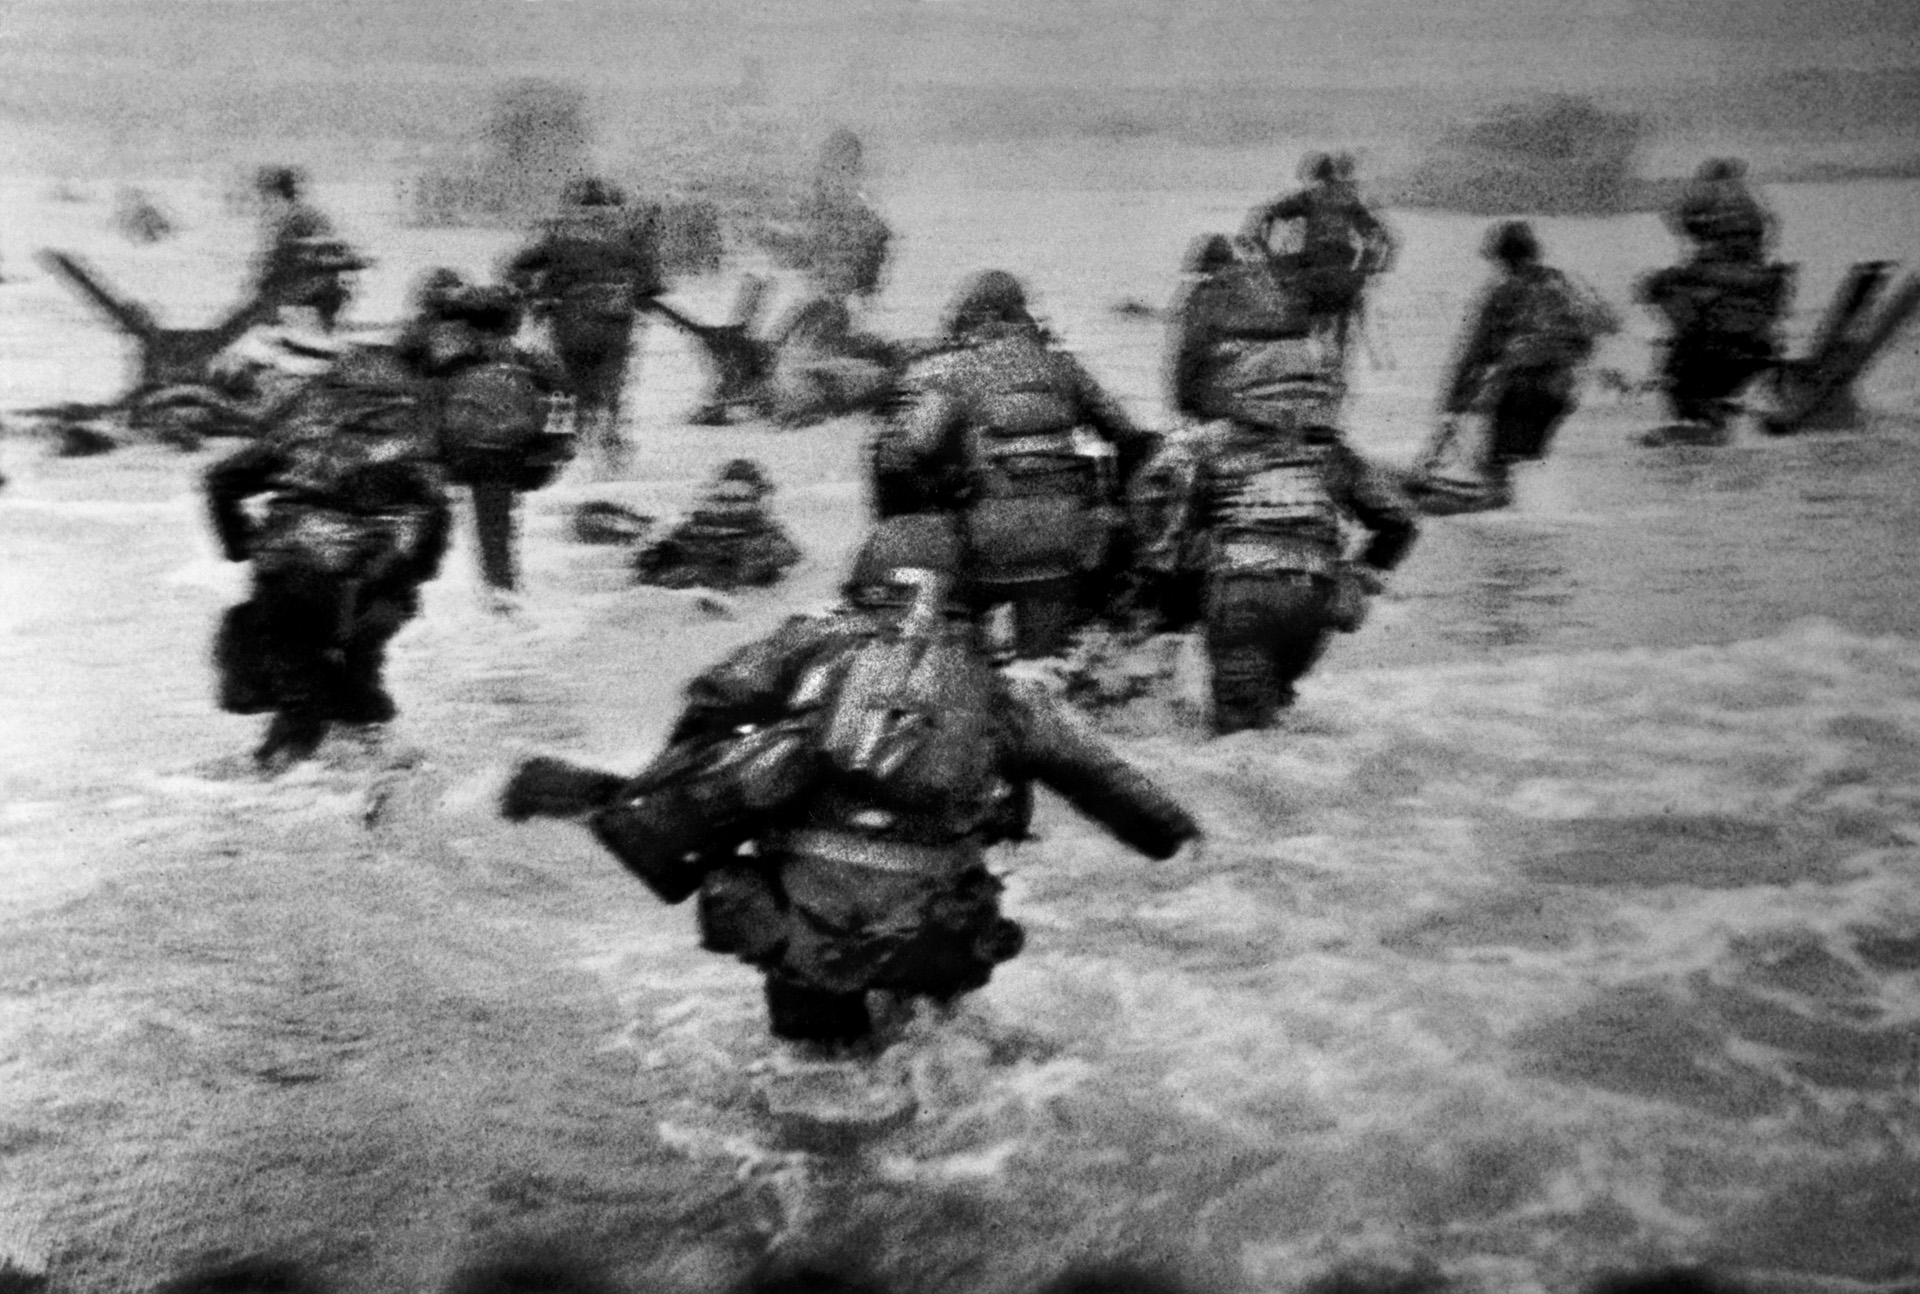 Robert Capa’s famous blurry image of the 1st Infantry Division’s amphibious landings at the Easy Red/Fox Green sectors of Omaha Beach indelibly captures the fear and chaos of the D-Day invasion. Four rolls of Capa’s film were rushed back to LIFE magazine’s London office, where a darkroom mistake ruined all but 11 images.